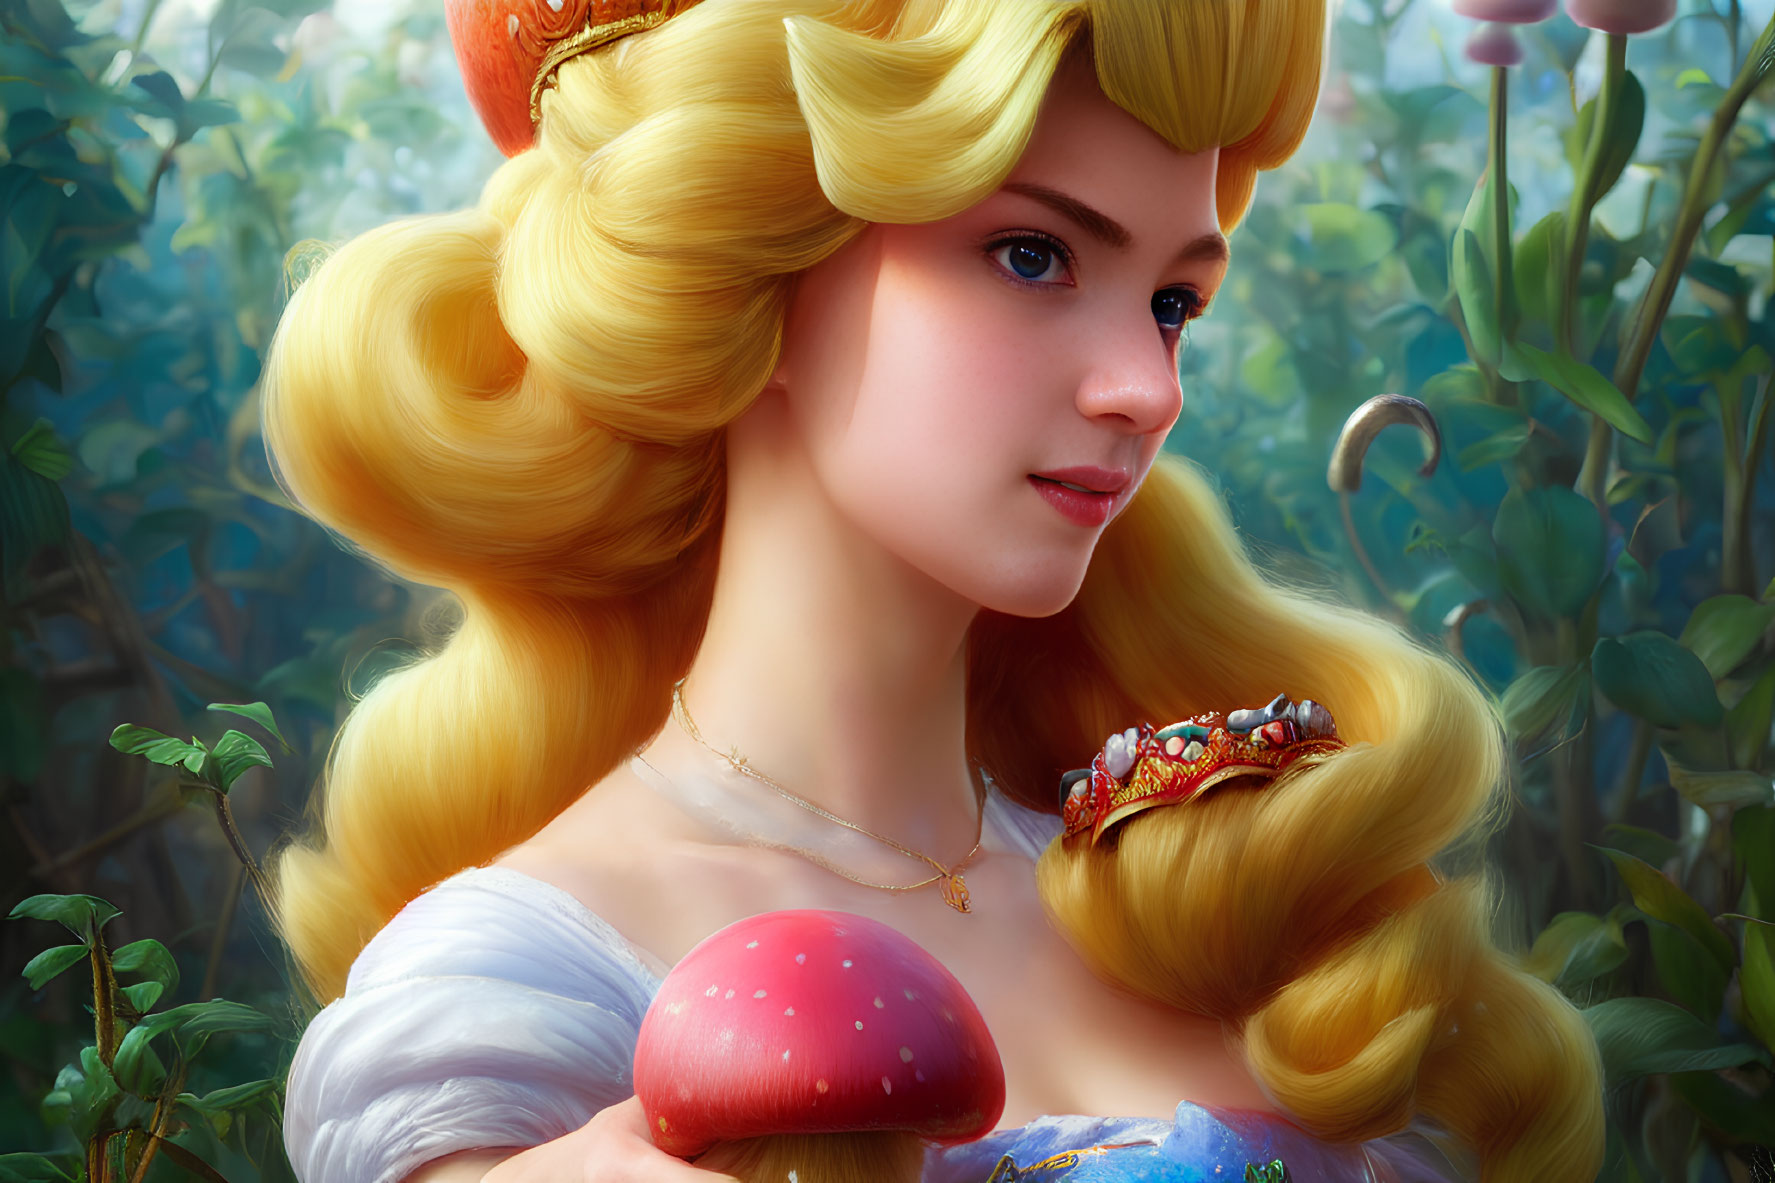 Blonde-Haired Princess with Red Mushroom in Forest